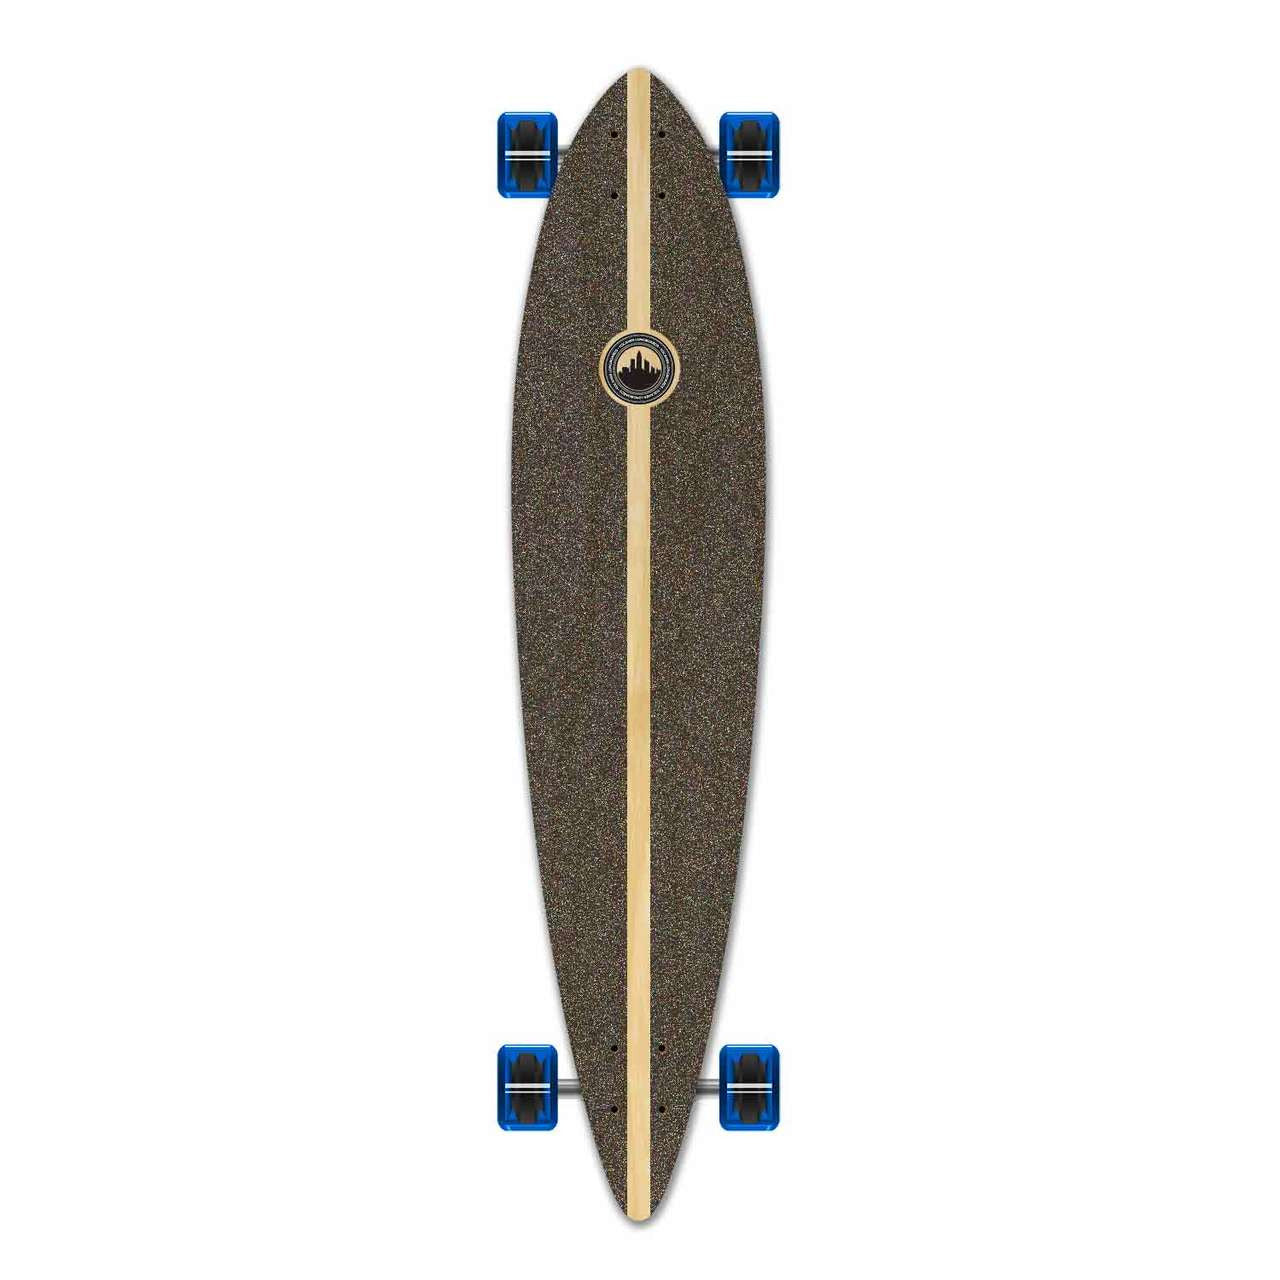 Yocaher Pintail Longboard Complete - Surfer